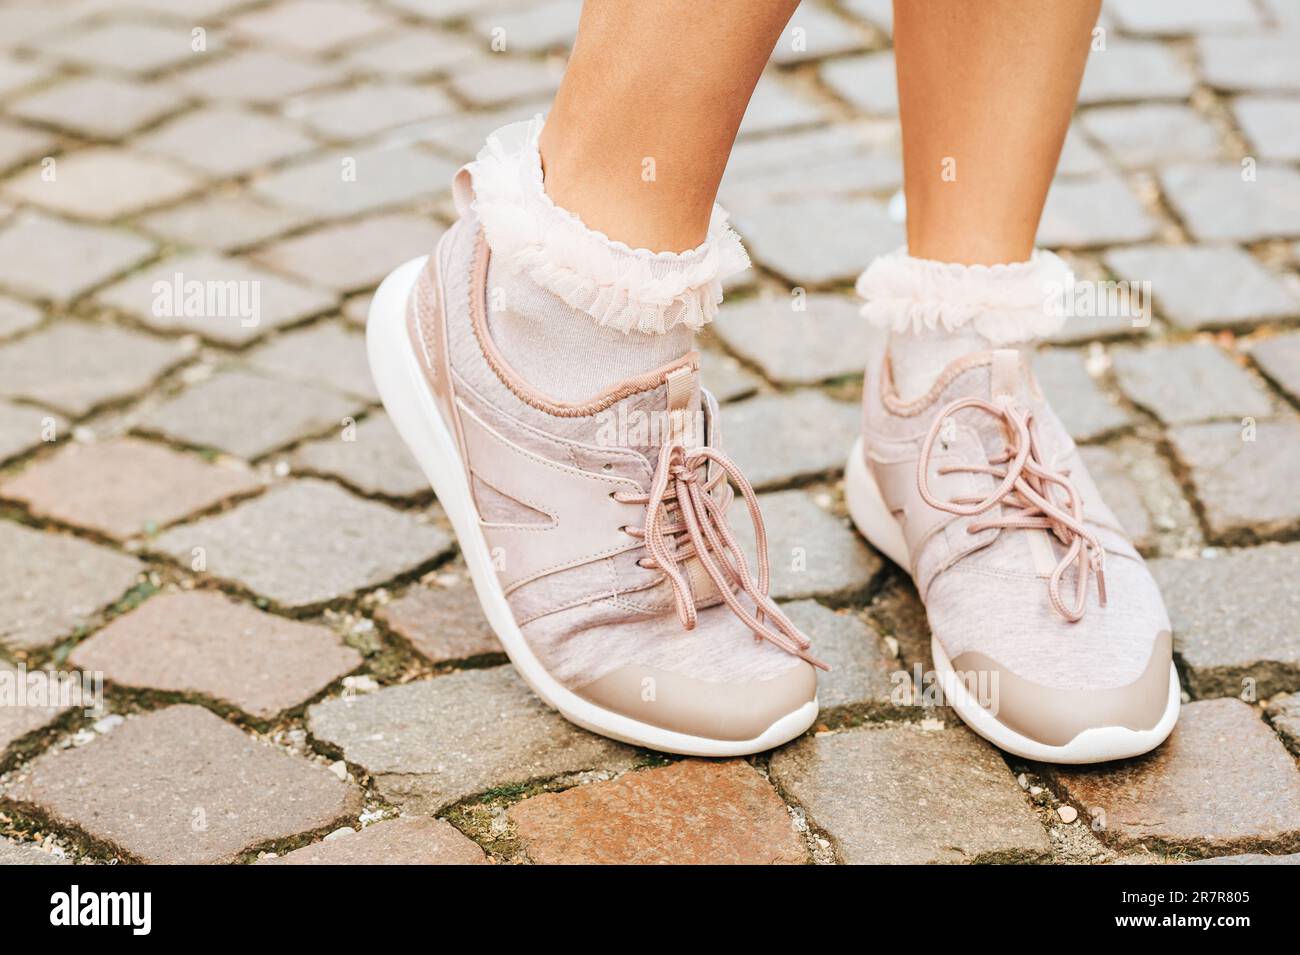 Woman wearing new comfy trainers and soft pink ruffle socks, close up image Stock Photo